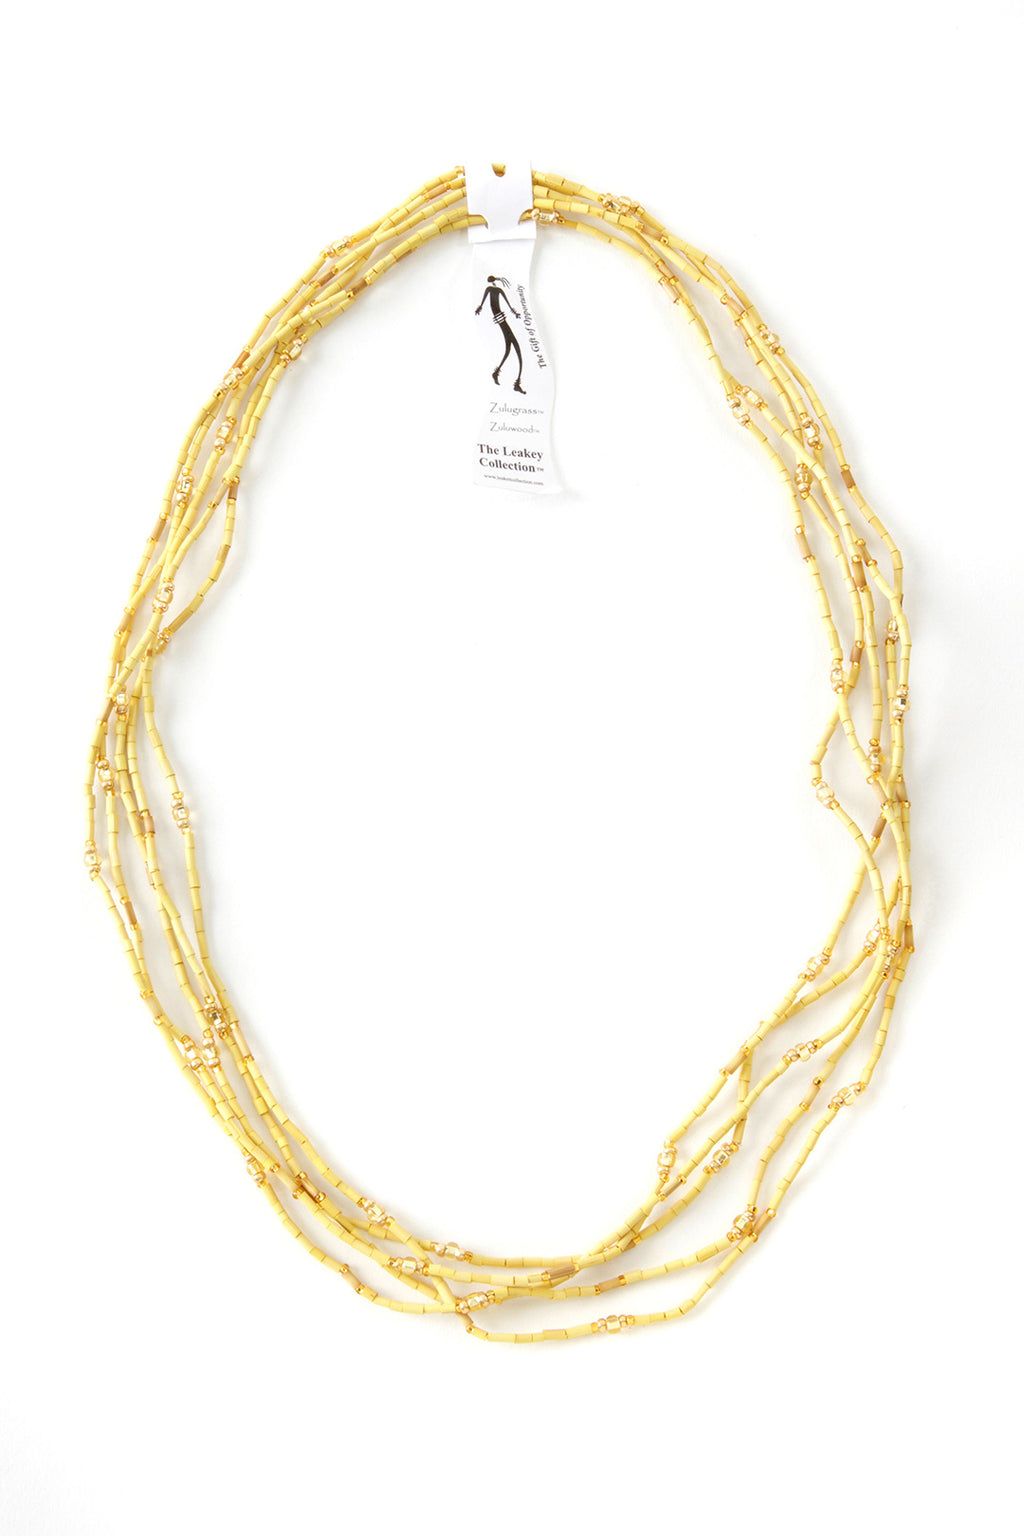 Set/5 Yellow 26" Zulugrass Single Strands from The Leakey Collection Default Title